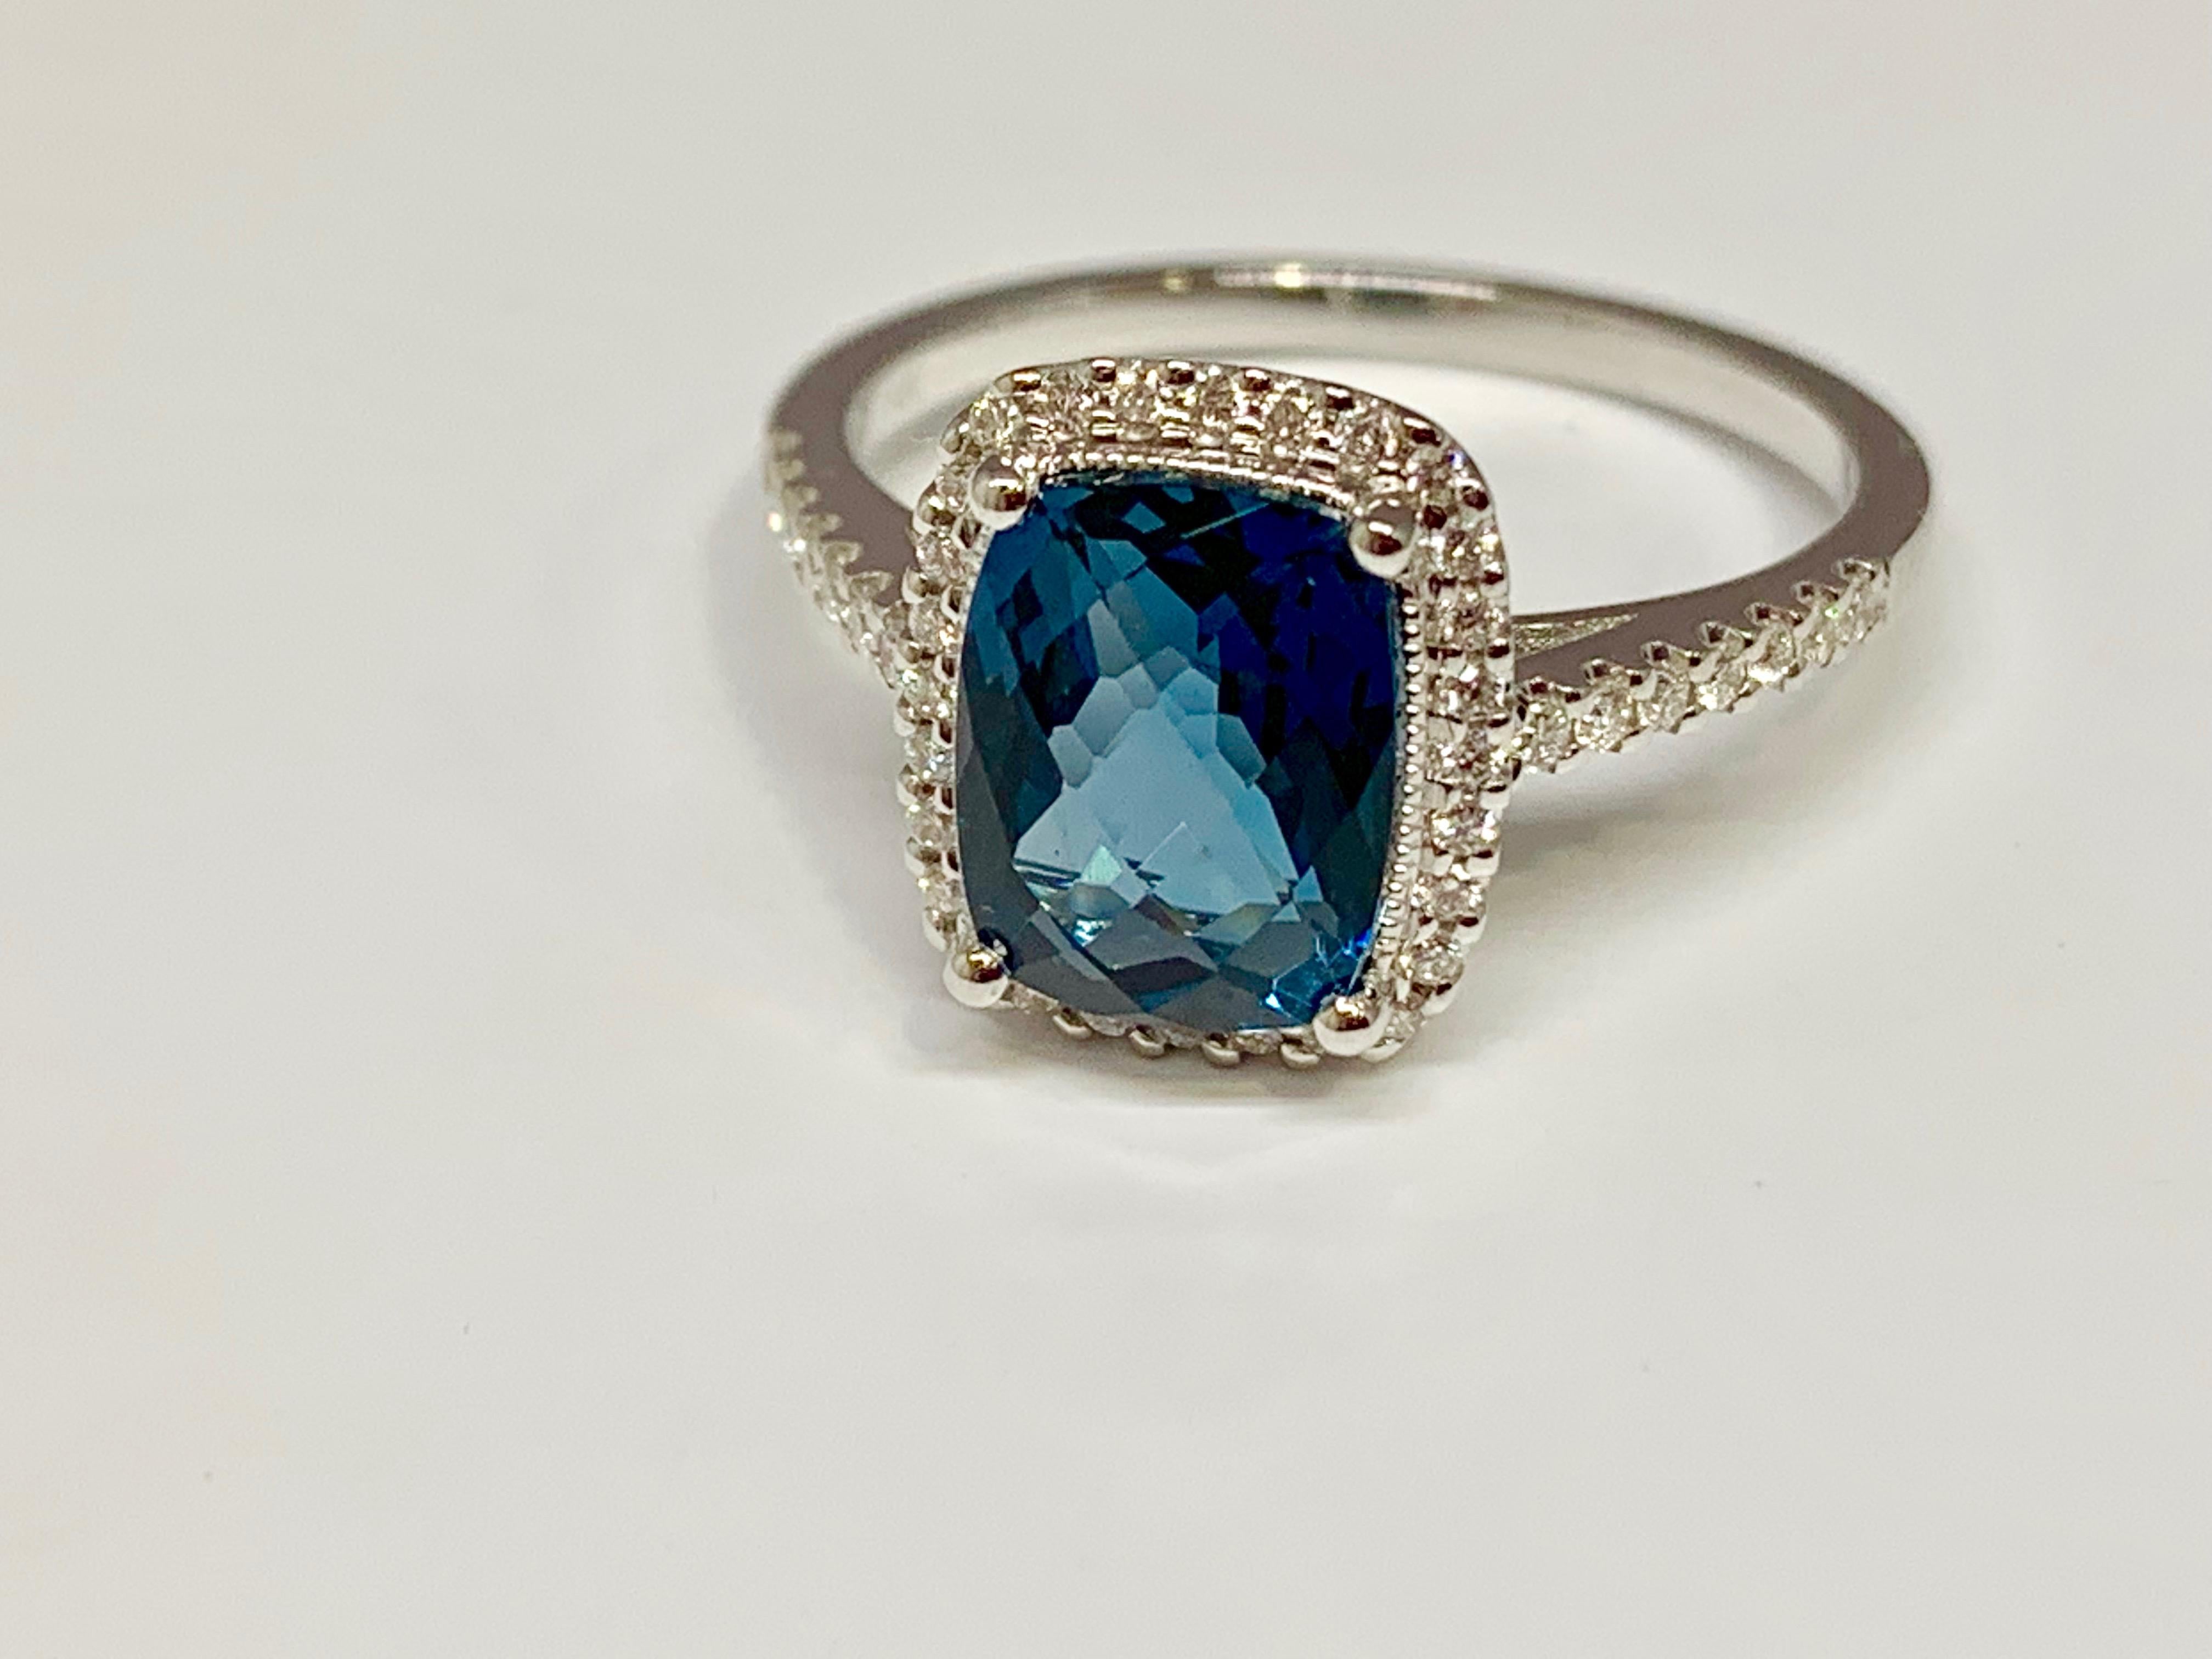 This Allison-Kaufman Company cocktail ring holds a stunning deep blue topaz cushion cut center stone with checkerboard faceting. The classic 14K white gold micro pave diamond mounting is currently a size 6.5 but can be resized upon request. This